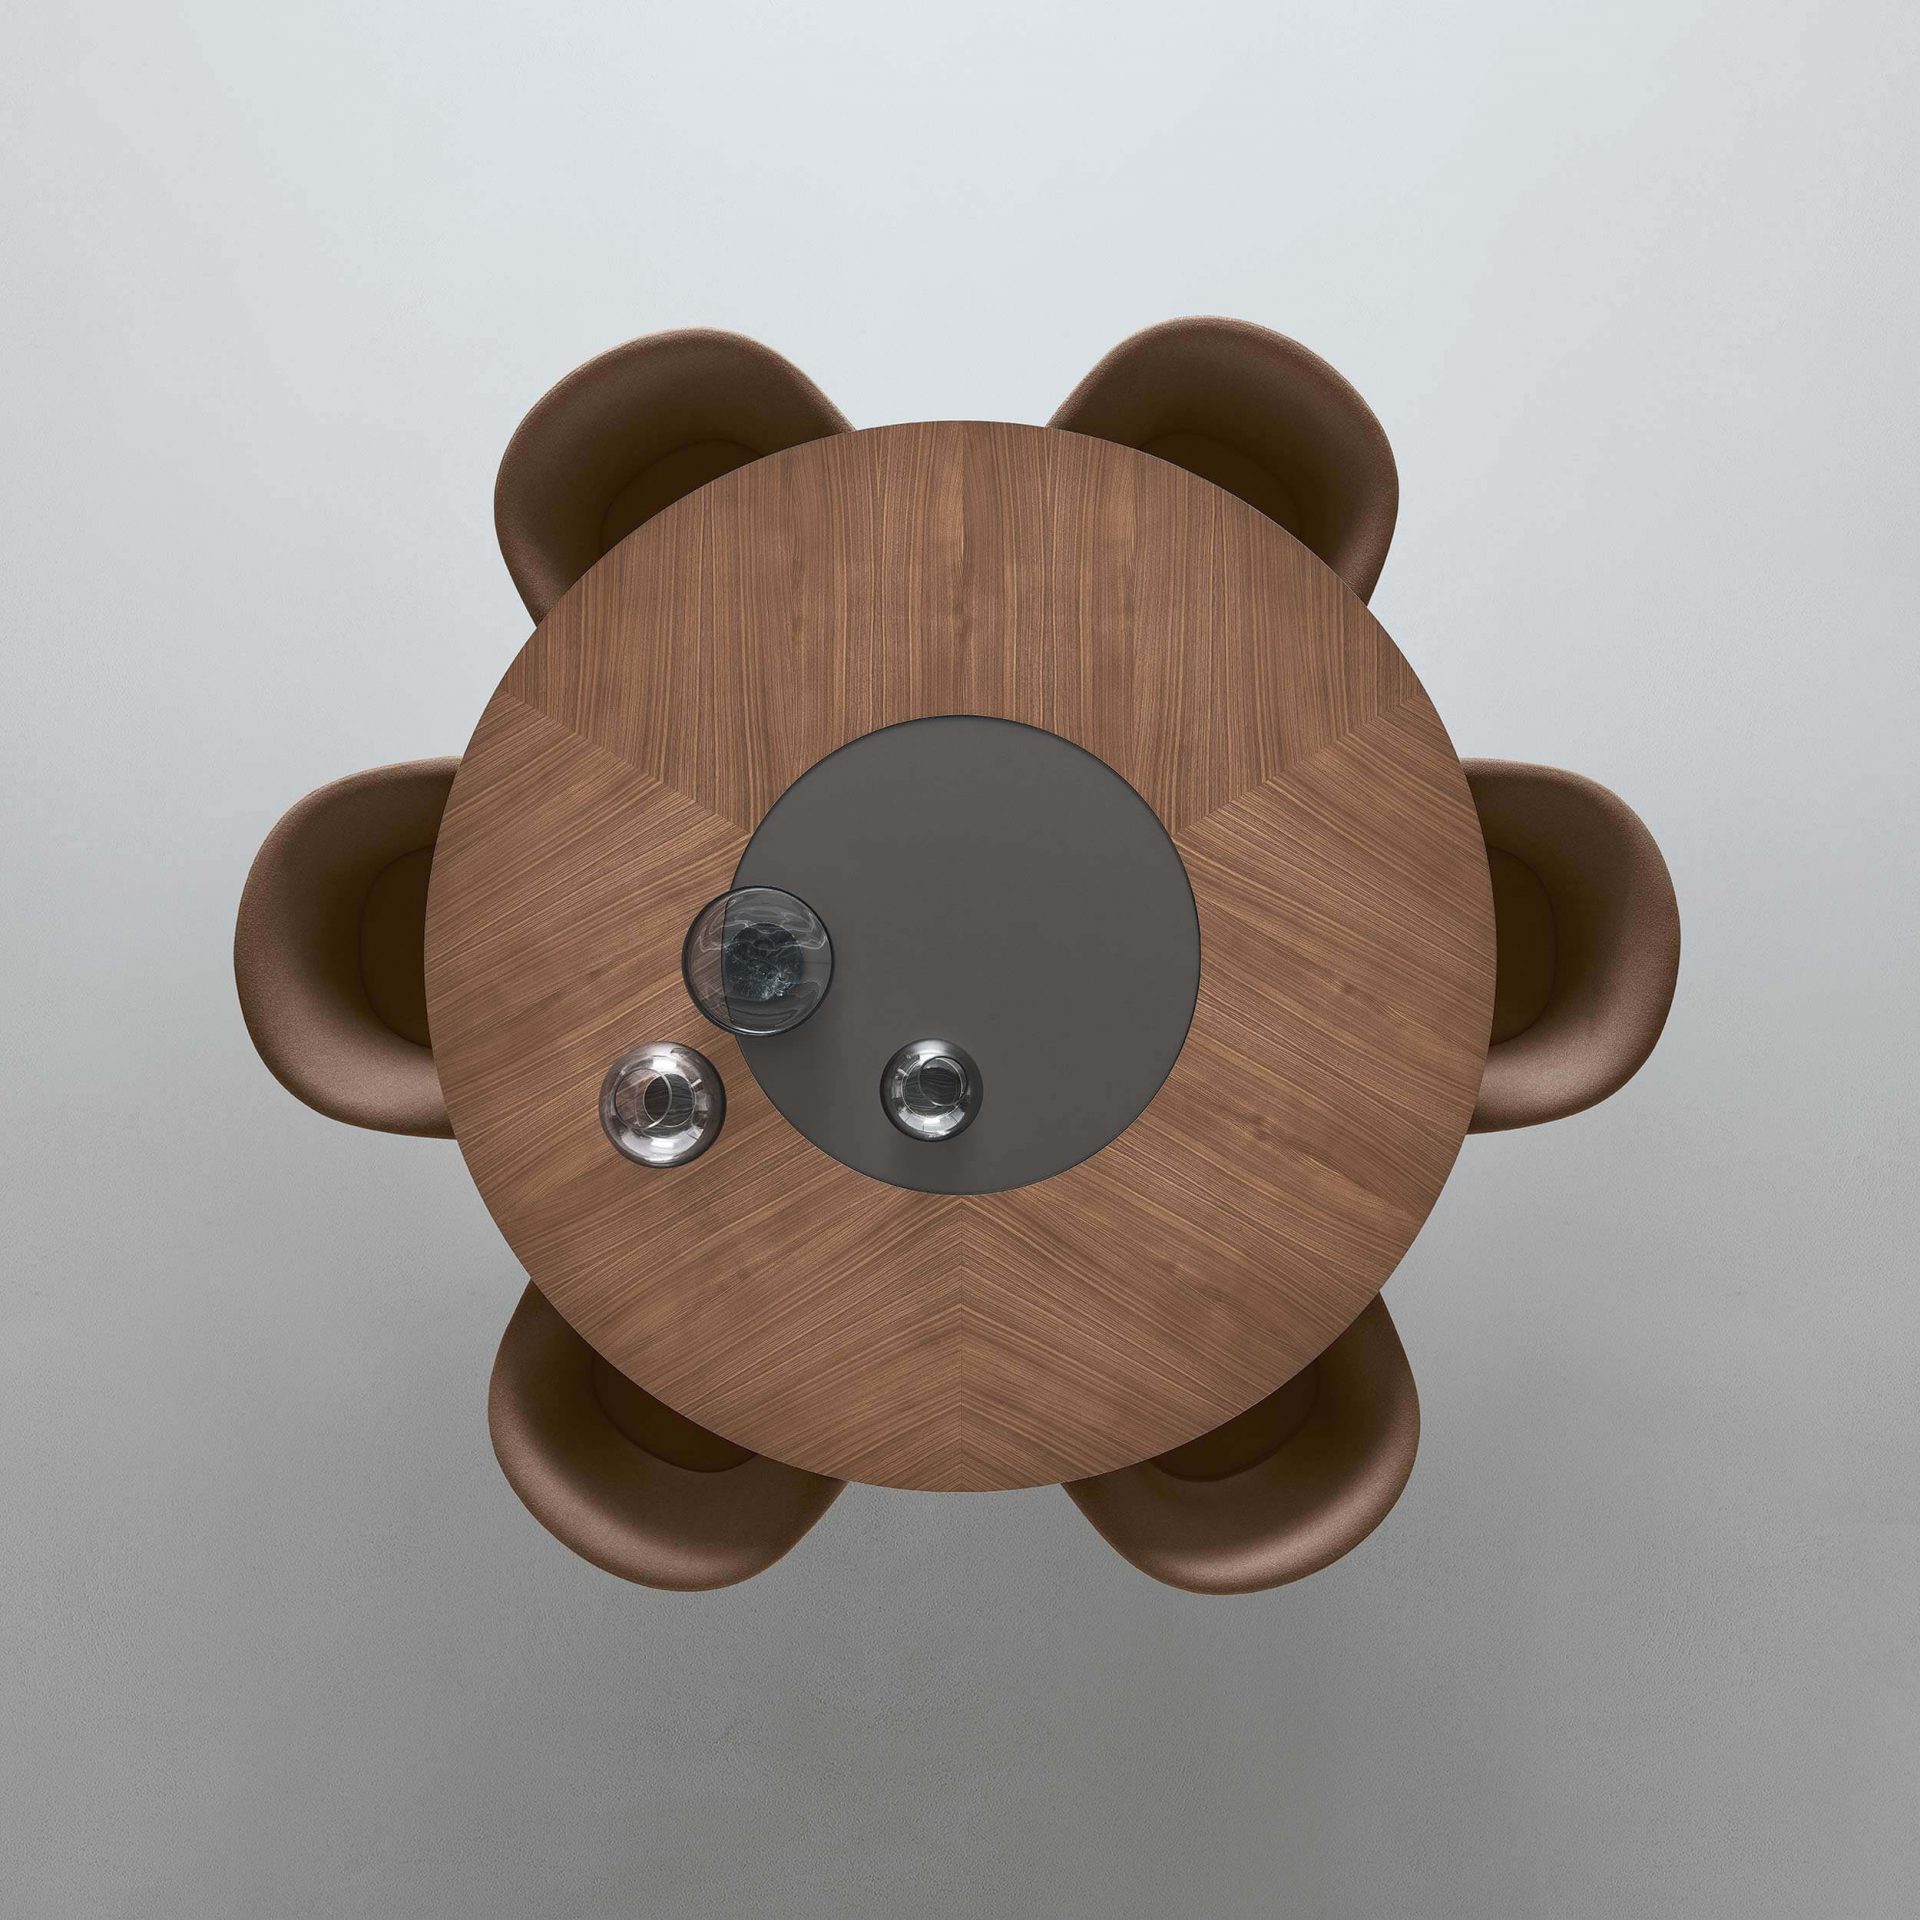 Manta table with lazy susan top